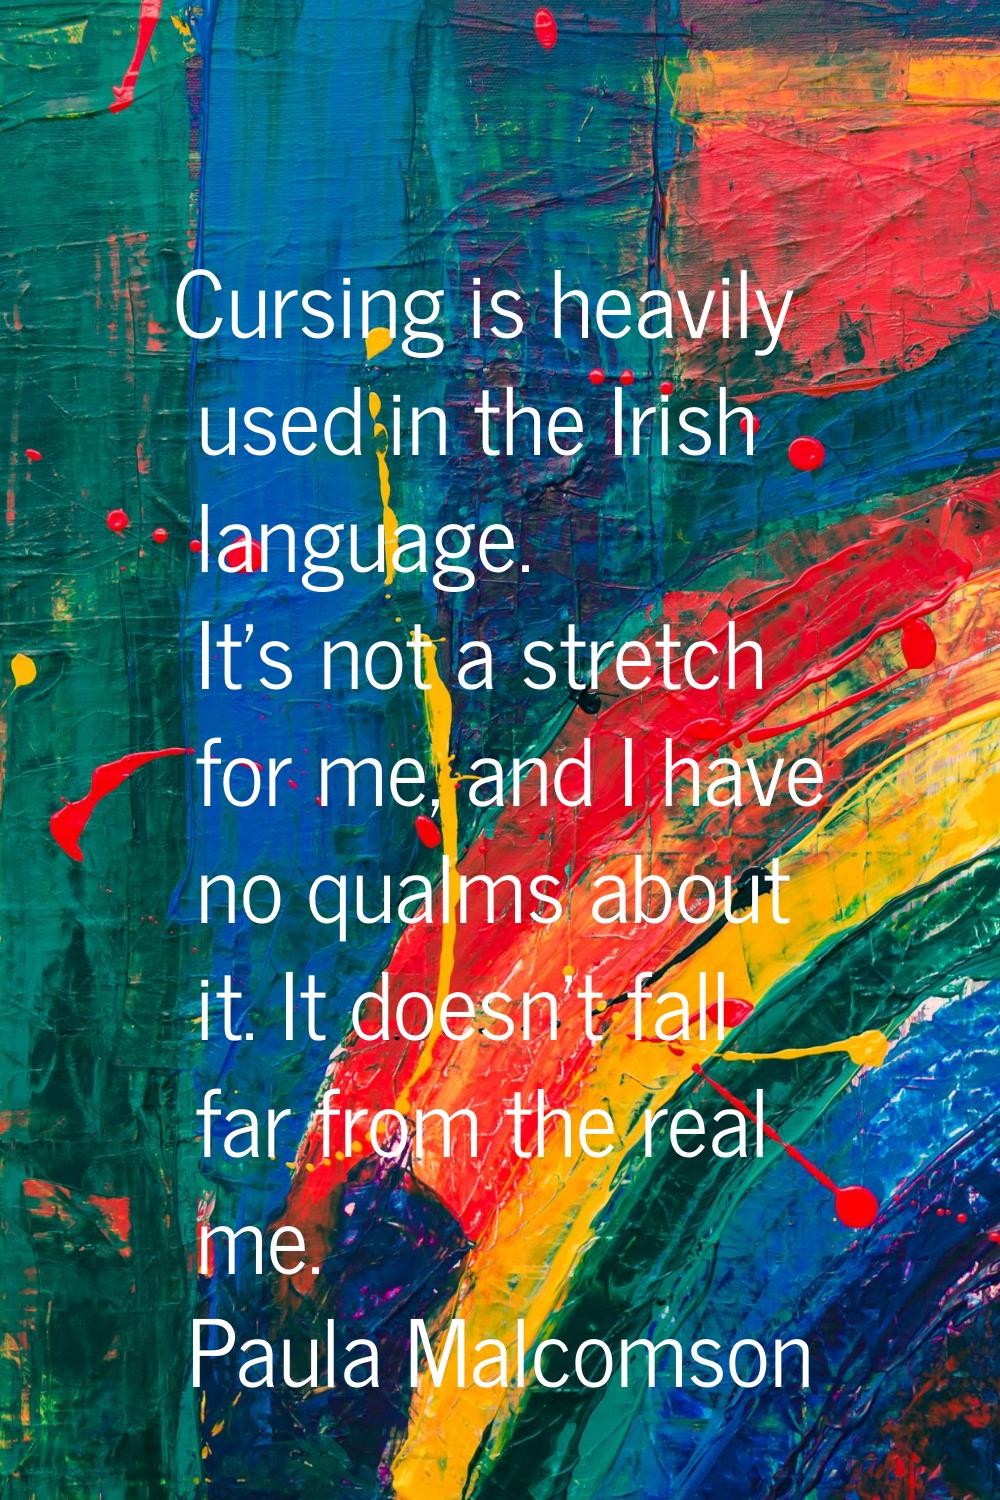 Cursing is heavily used in the Irish language. It's not a stretch for me, and I have no qualms abou